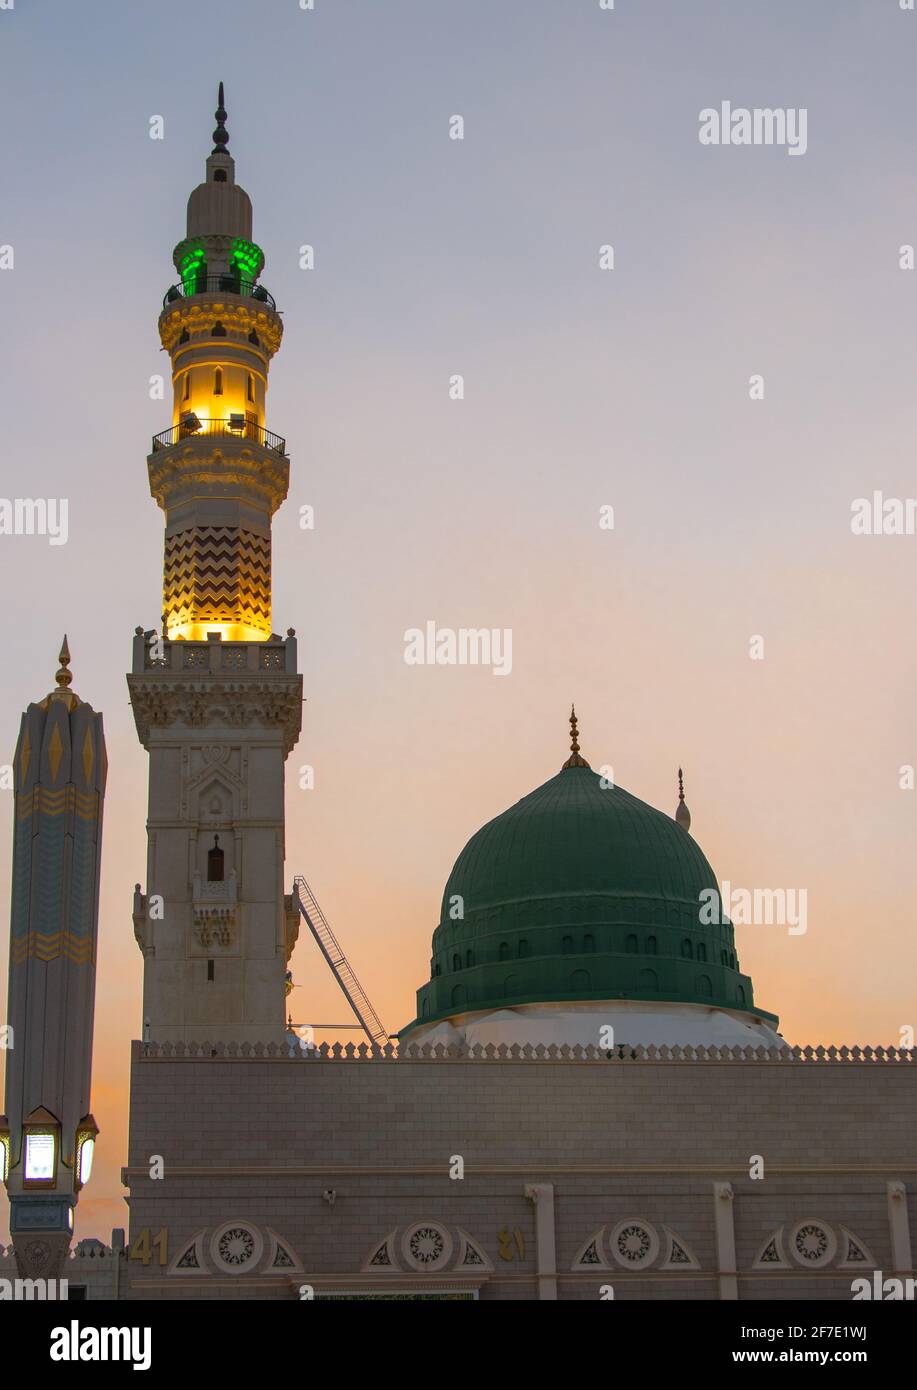 Sunset time in Madinah Munawwarah. An evening view of the beautiful Masjid Nabawi of Medina. Dome of Prophet Muhammad's Mosque Stock Photo -